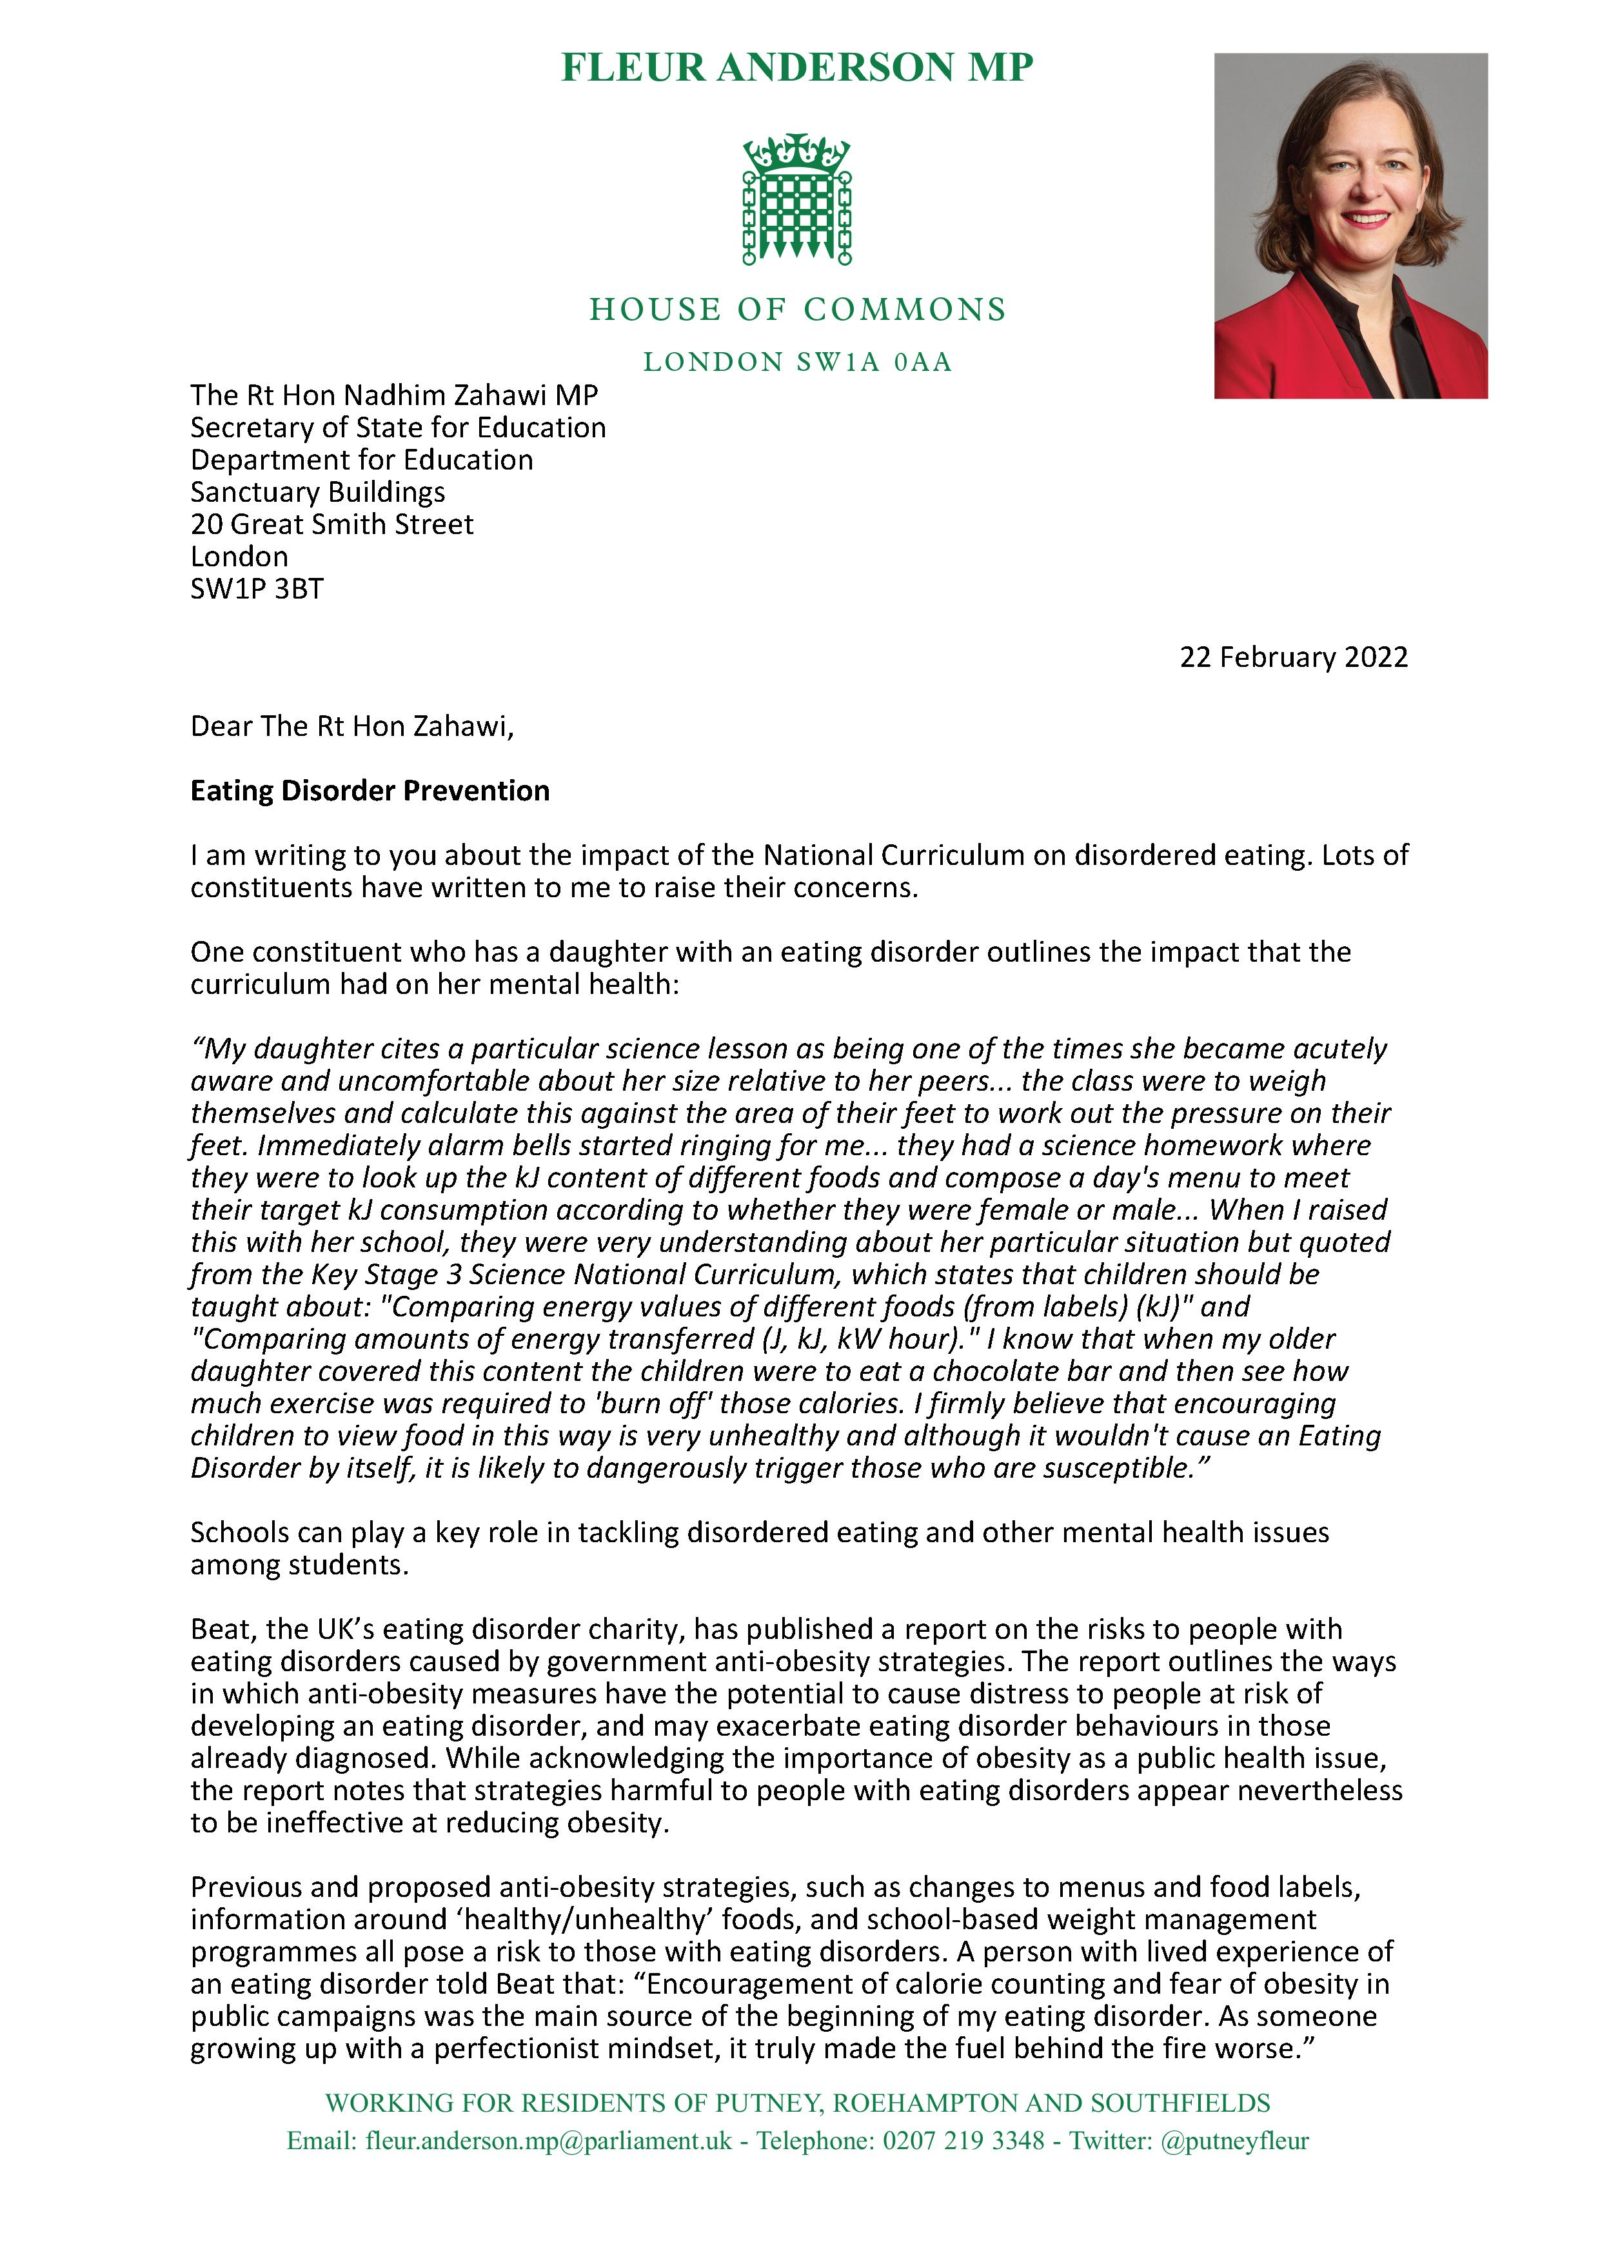 Letter to Secretary of State for Education - Eating Disorder Prevention - Page 1